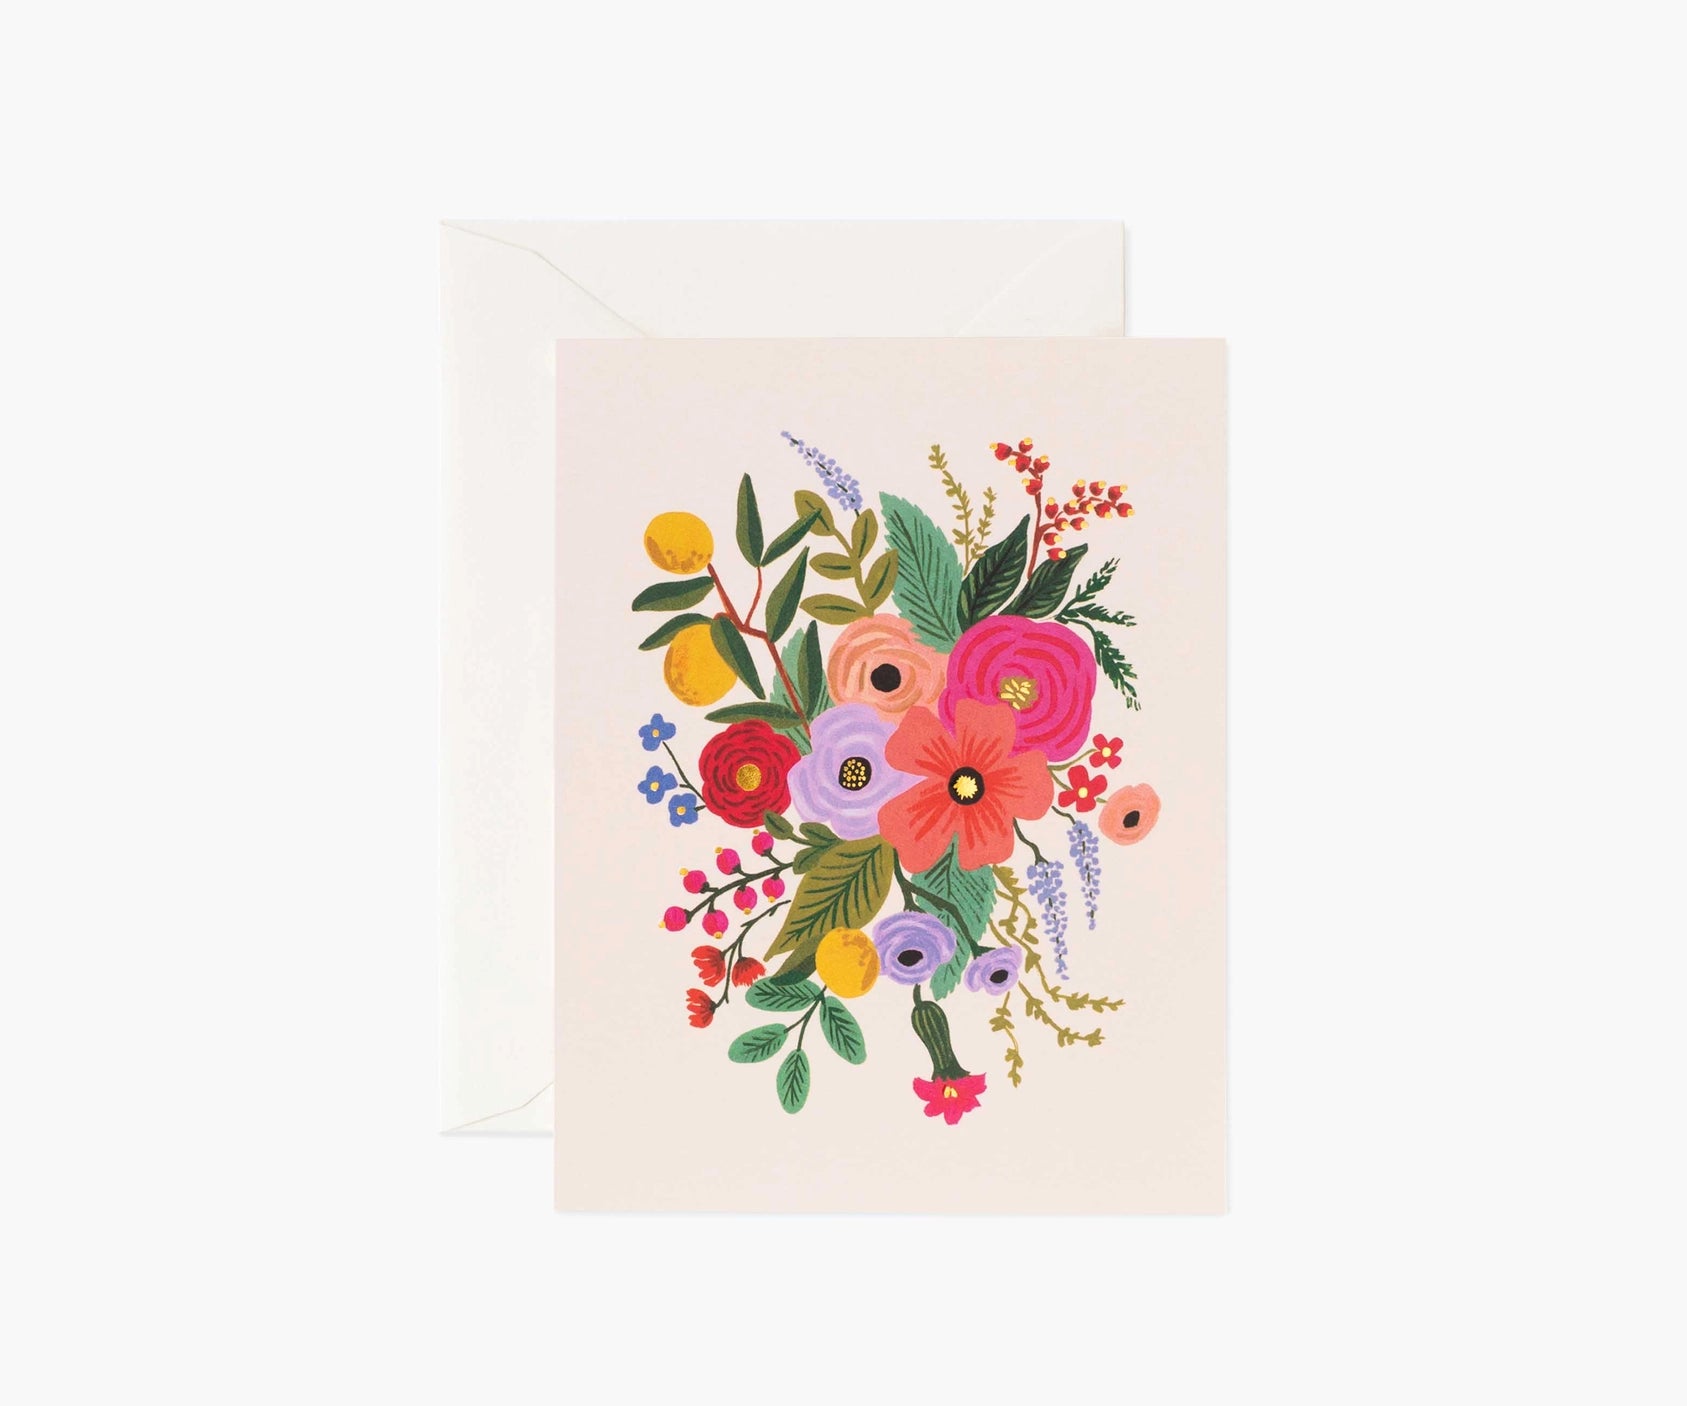  RIFLE PAPER CO. Garden Party Themed Playing Cards for Adults,  Standard Deck of Cards for Card Games and Poker at Home or Party, Beautiful  Printed Floral Design : Toys & Games